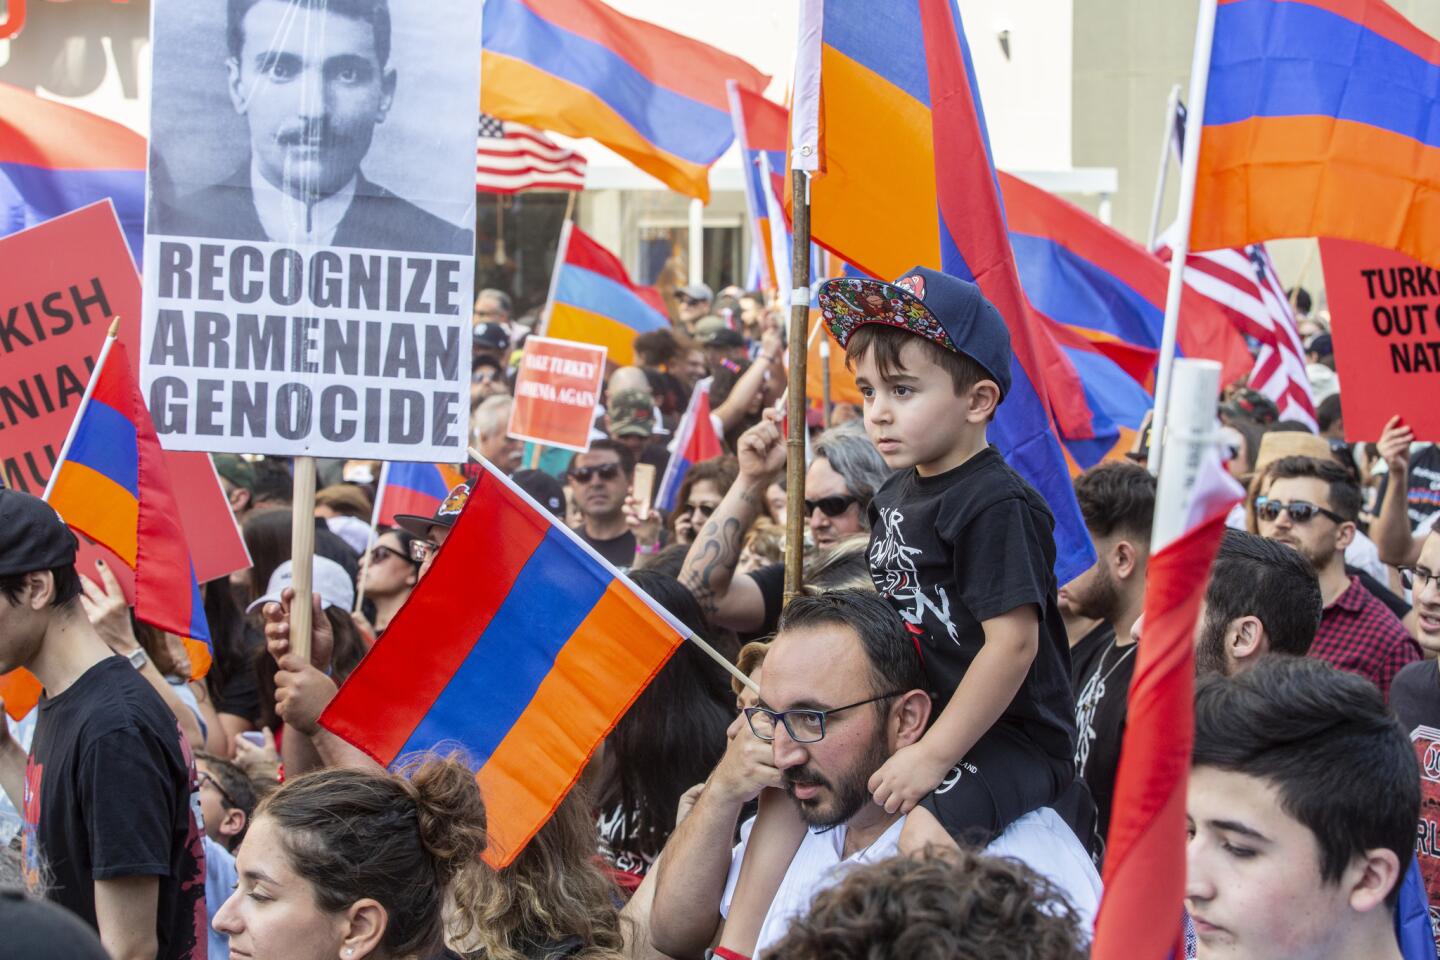 In 2015, L.A. city officials designated Hollywood Boulevard and Western Avenue in Little Armenia as Armenian Genocide Memorial Square.